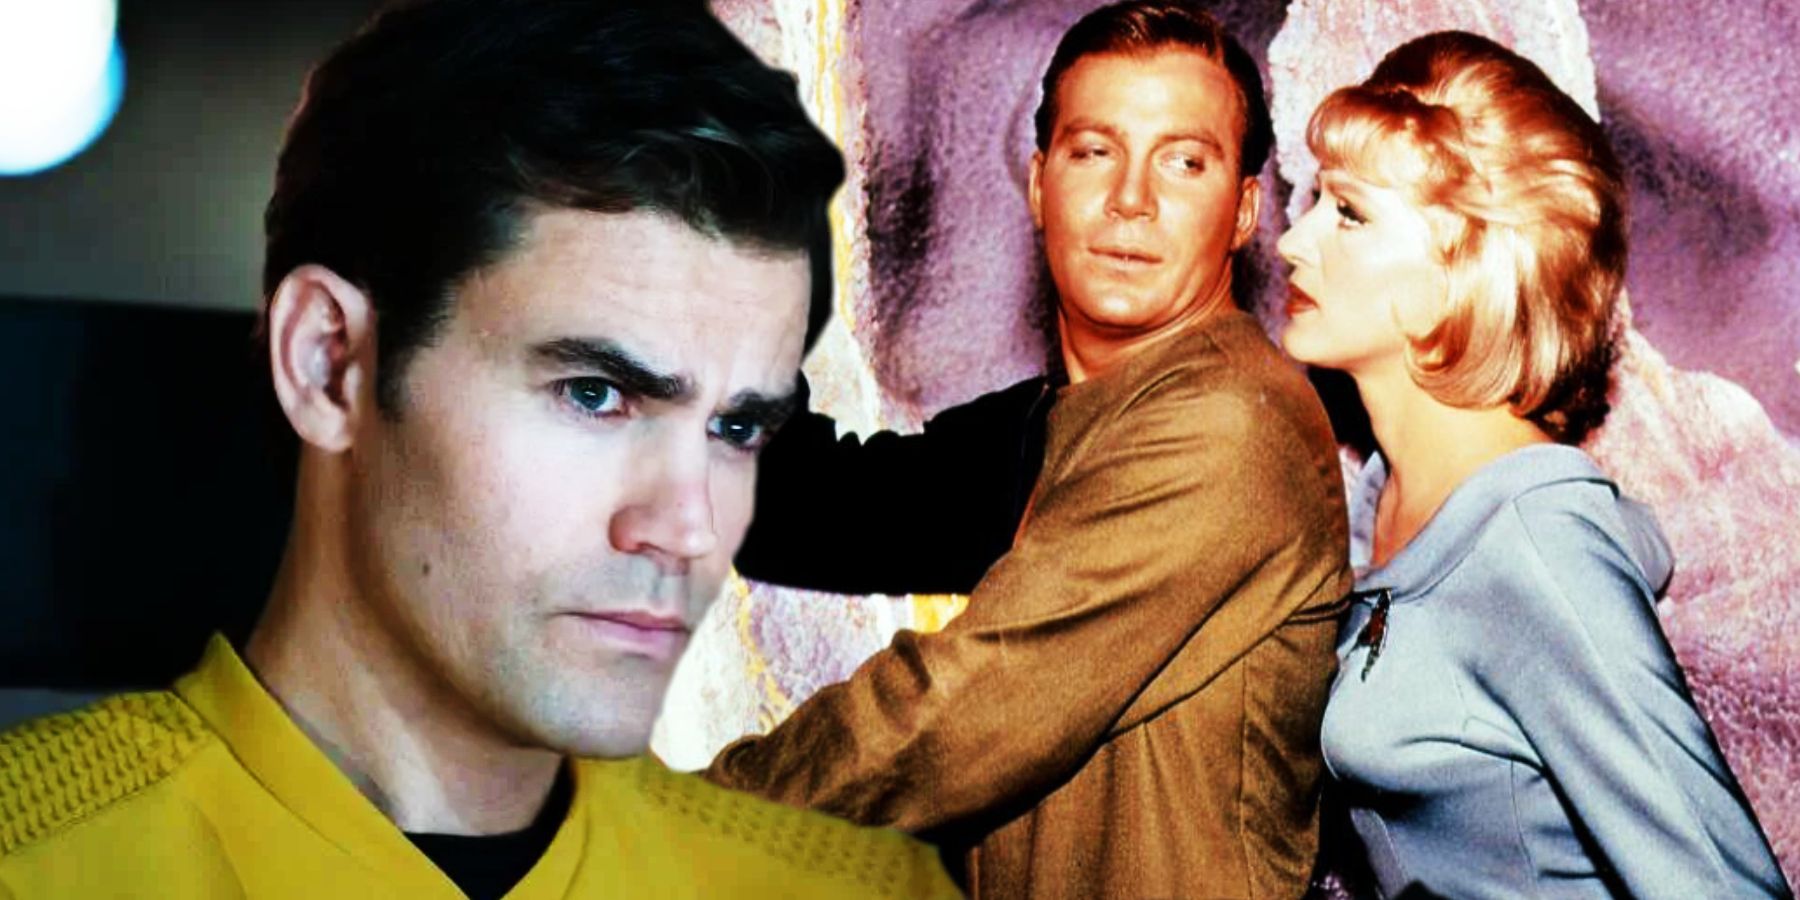 Paul Wesley as Kirk and William Shatner and Majel Barratt as Kirk and Chapel